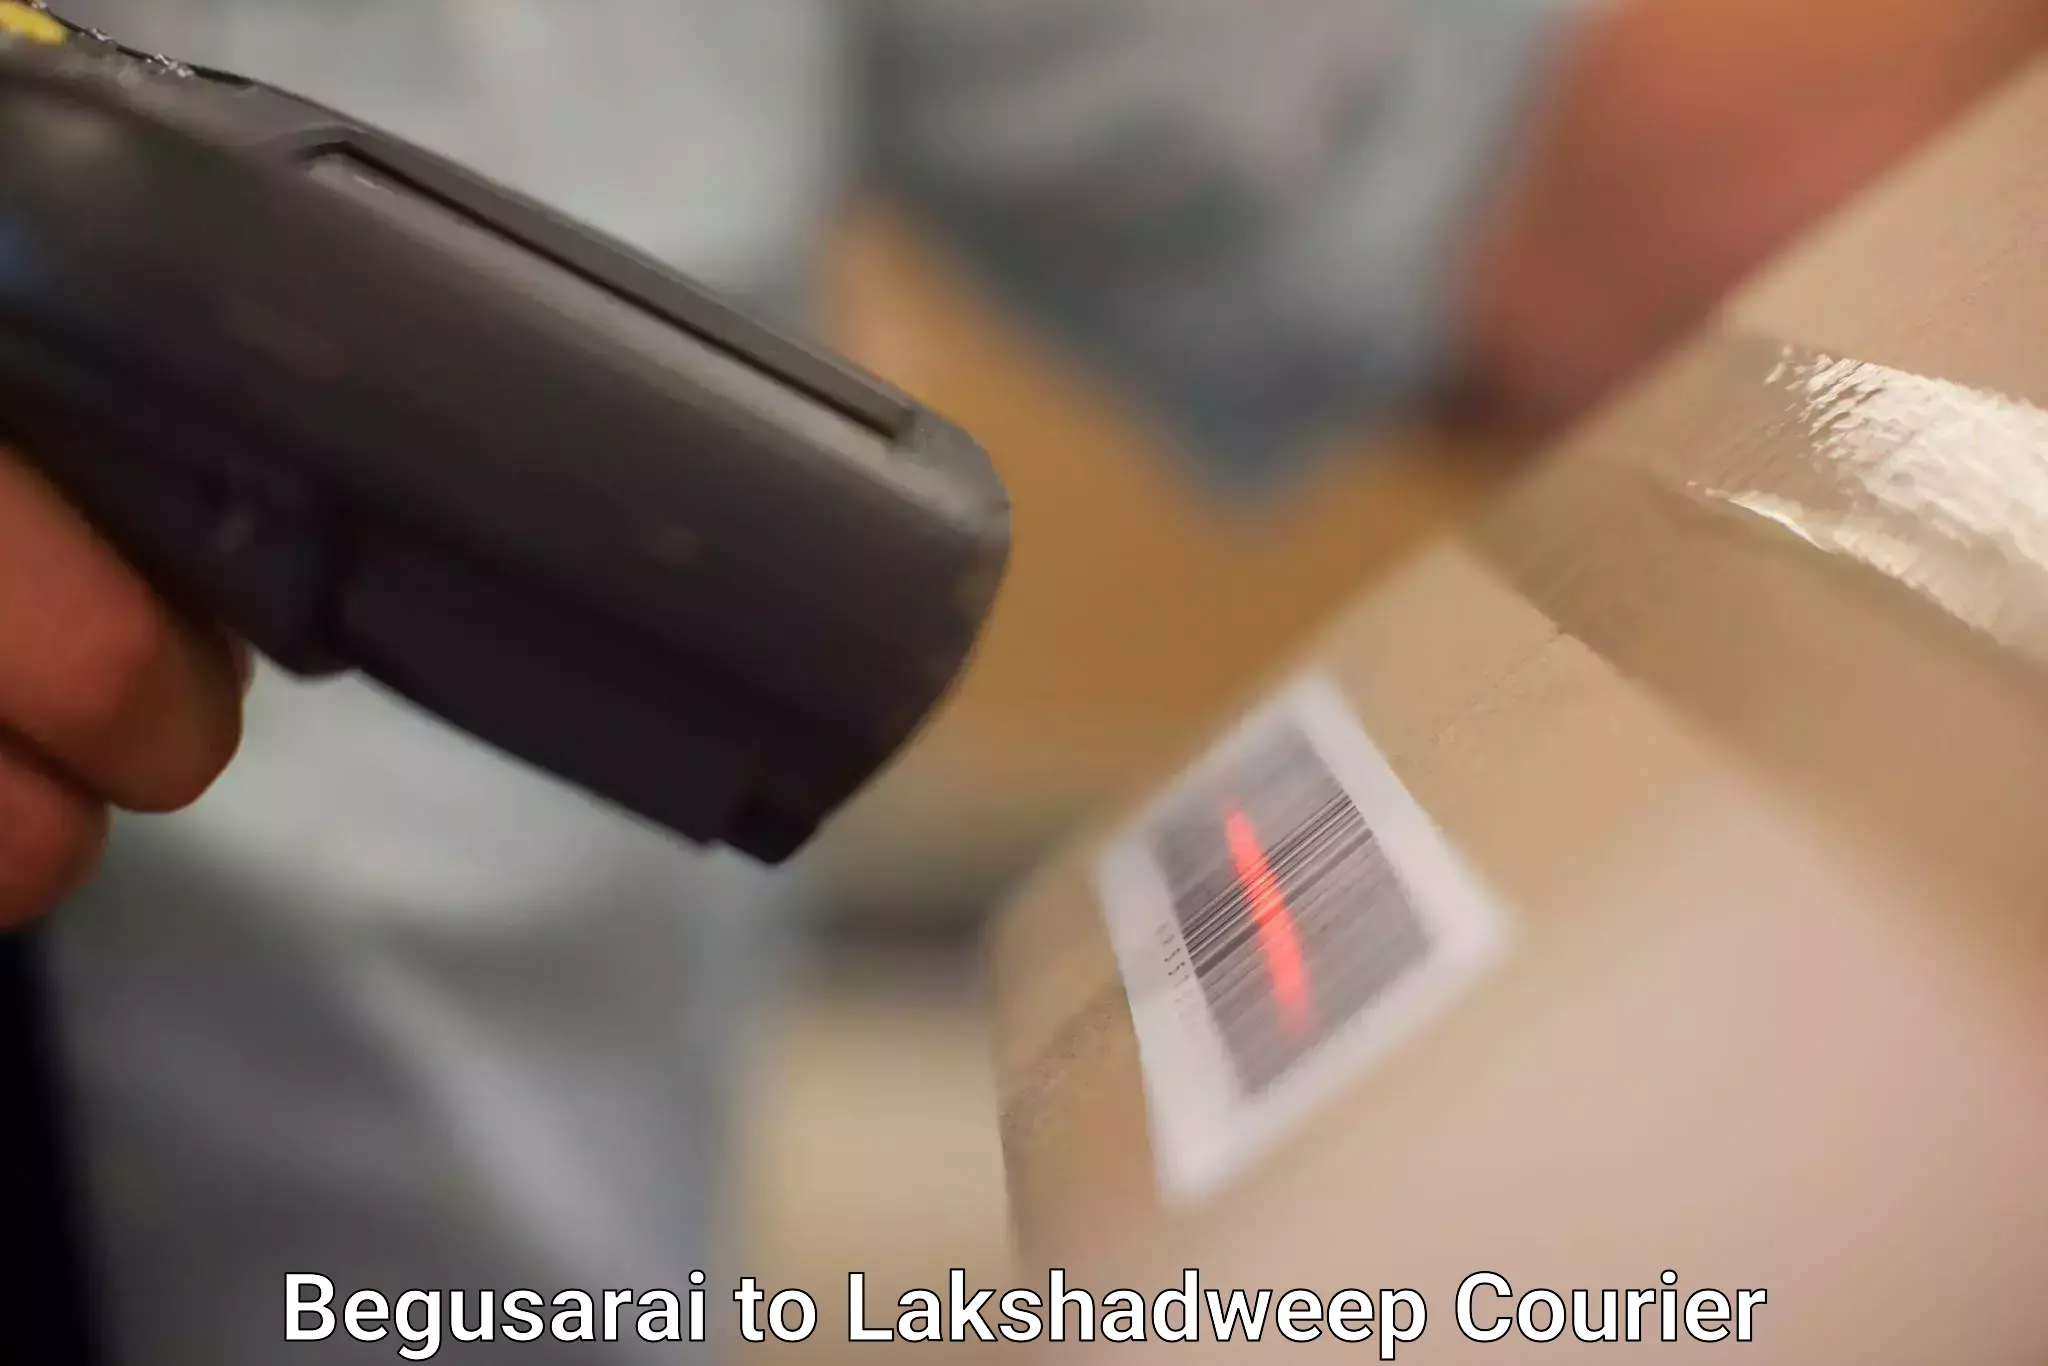 State-of-the-art courier technology Begusarai to Lakshadweep